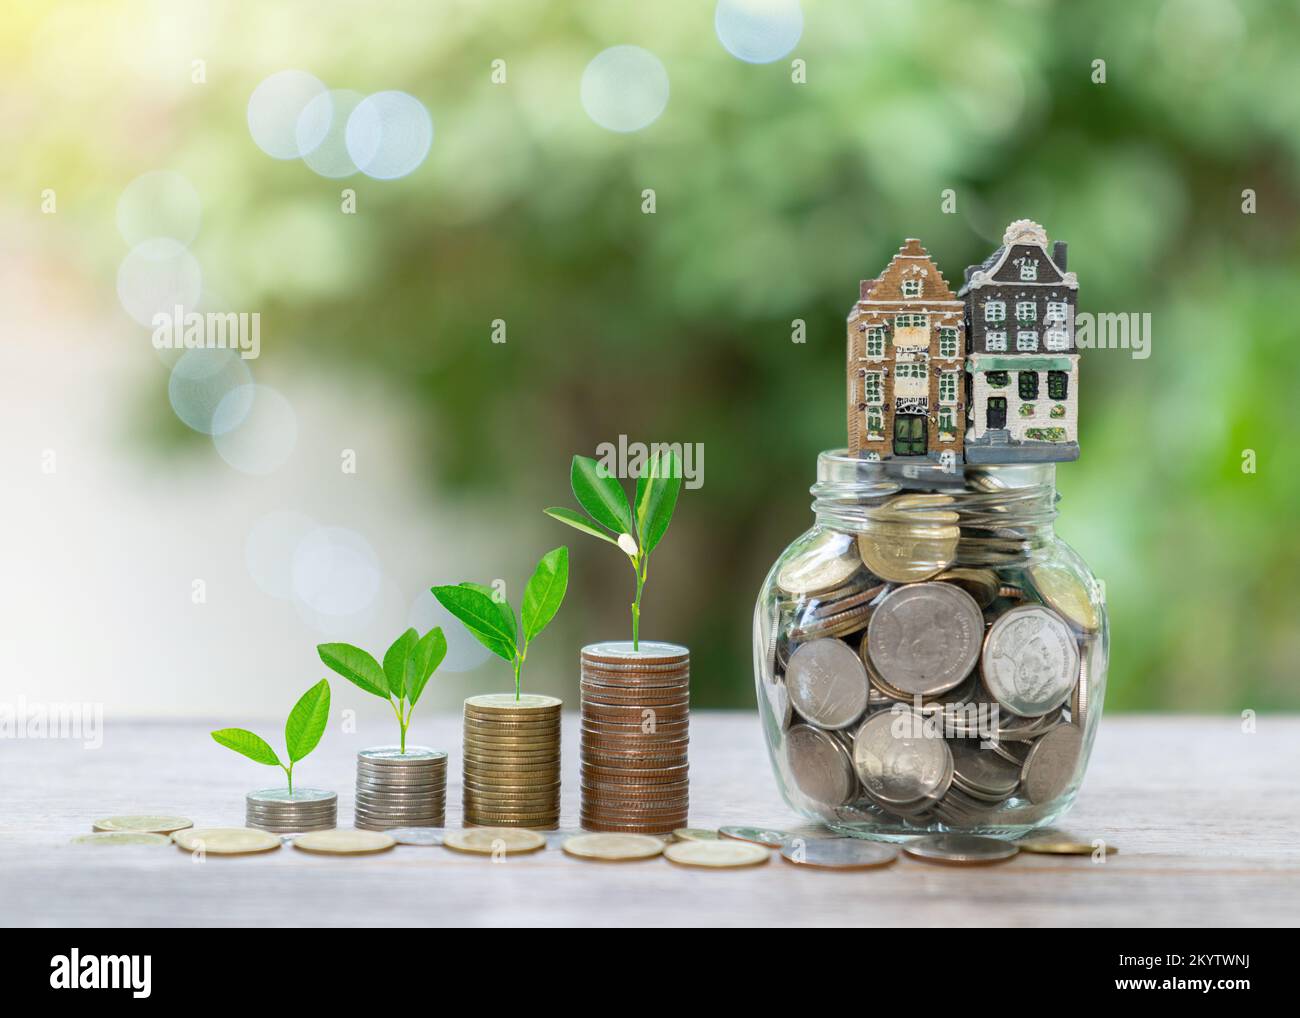 House toy on coin in jar and coin stact with plant growth on top concept of saving money for house. Out of focus background. Stock Photo